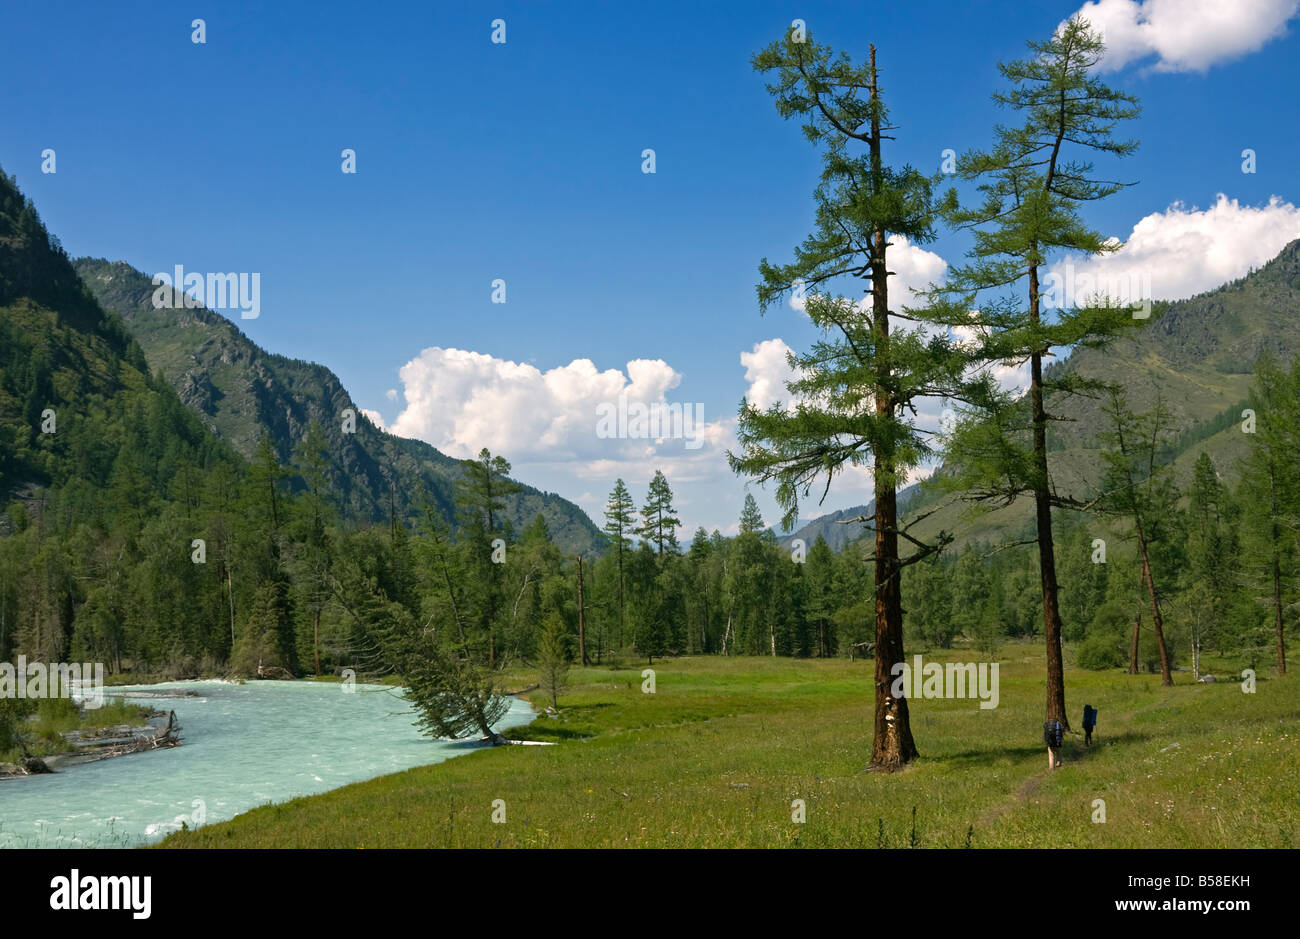 Tourists near mountain river in forest, Altai, Russia Stock Photo